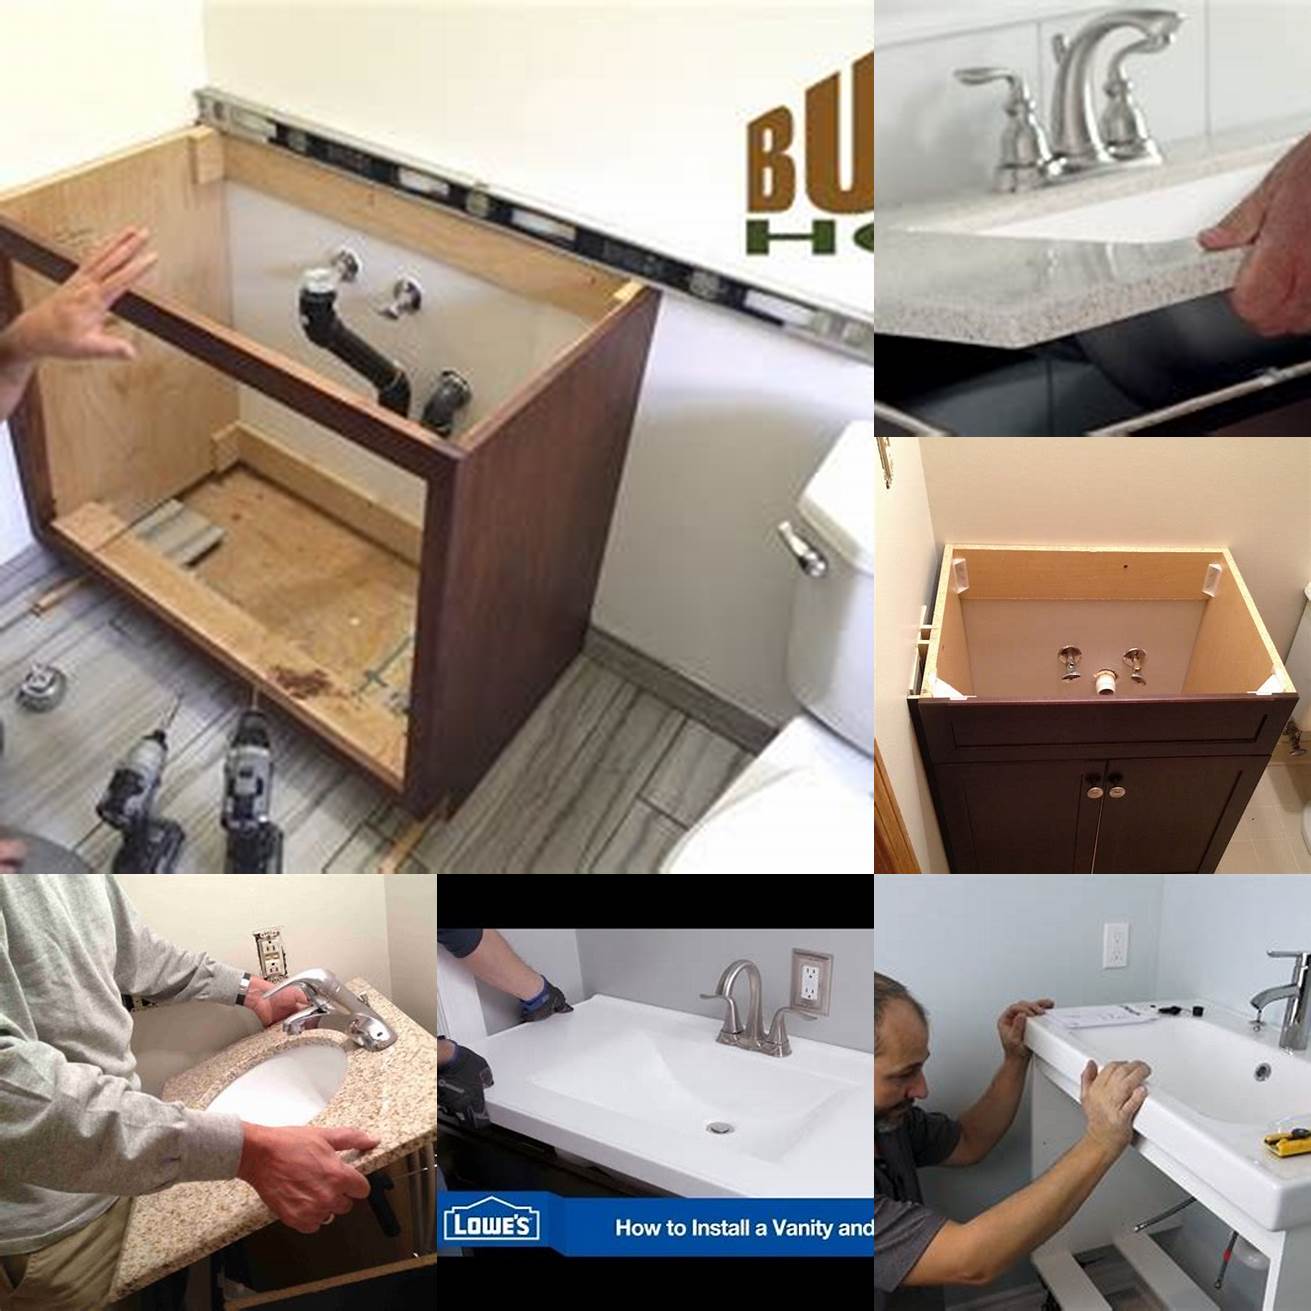 4 Install New Vanity Follow the manufacturers instructions to install your new vanity